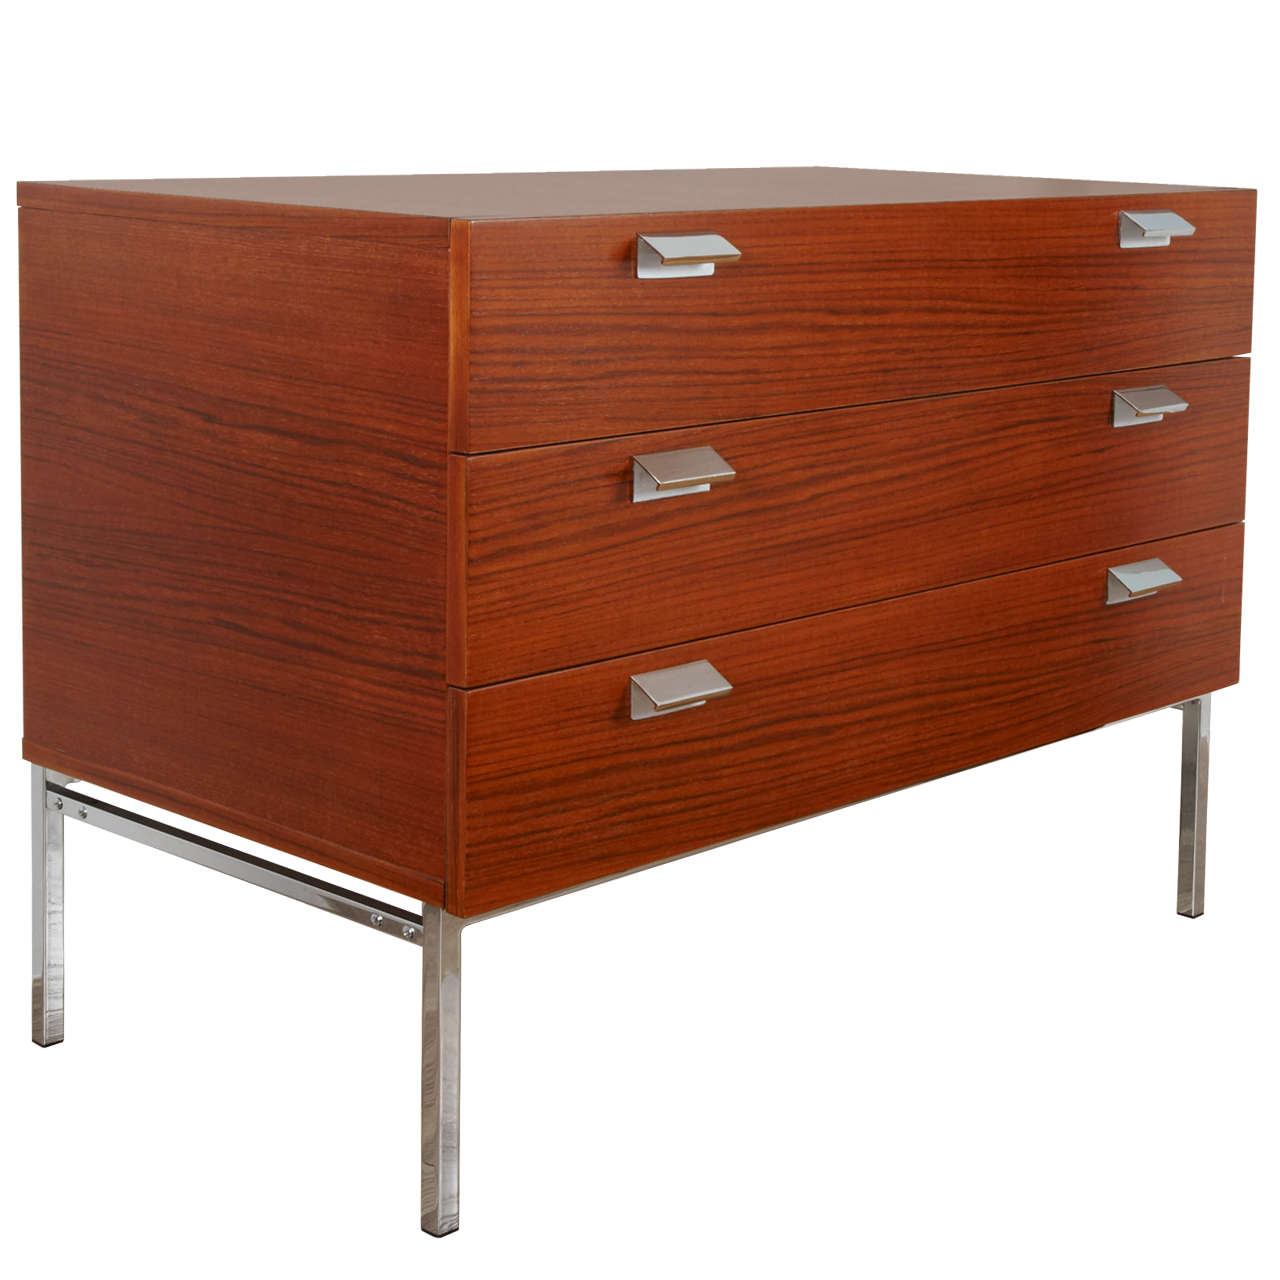 Chest of drawers 812 by André Monpoix - Meubles TV edition - 1956 For Sale